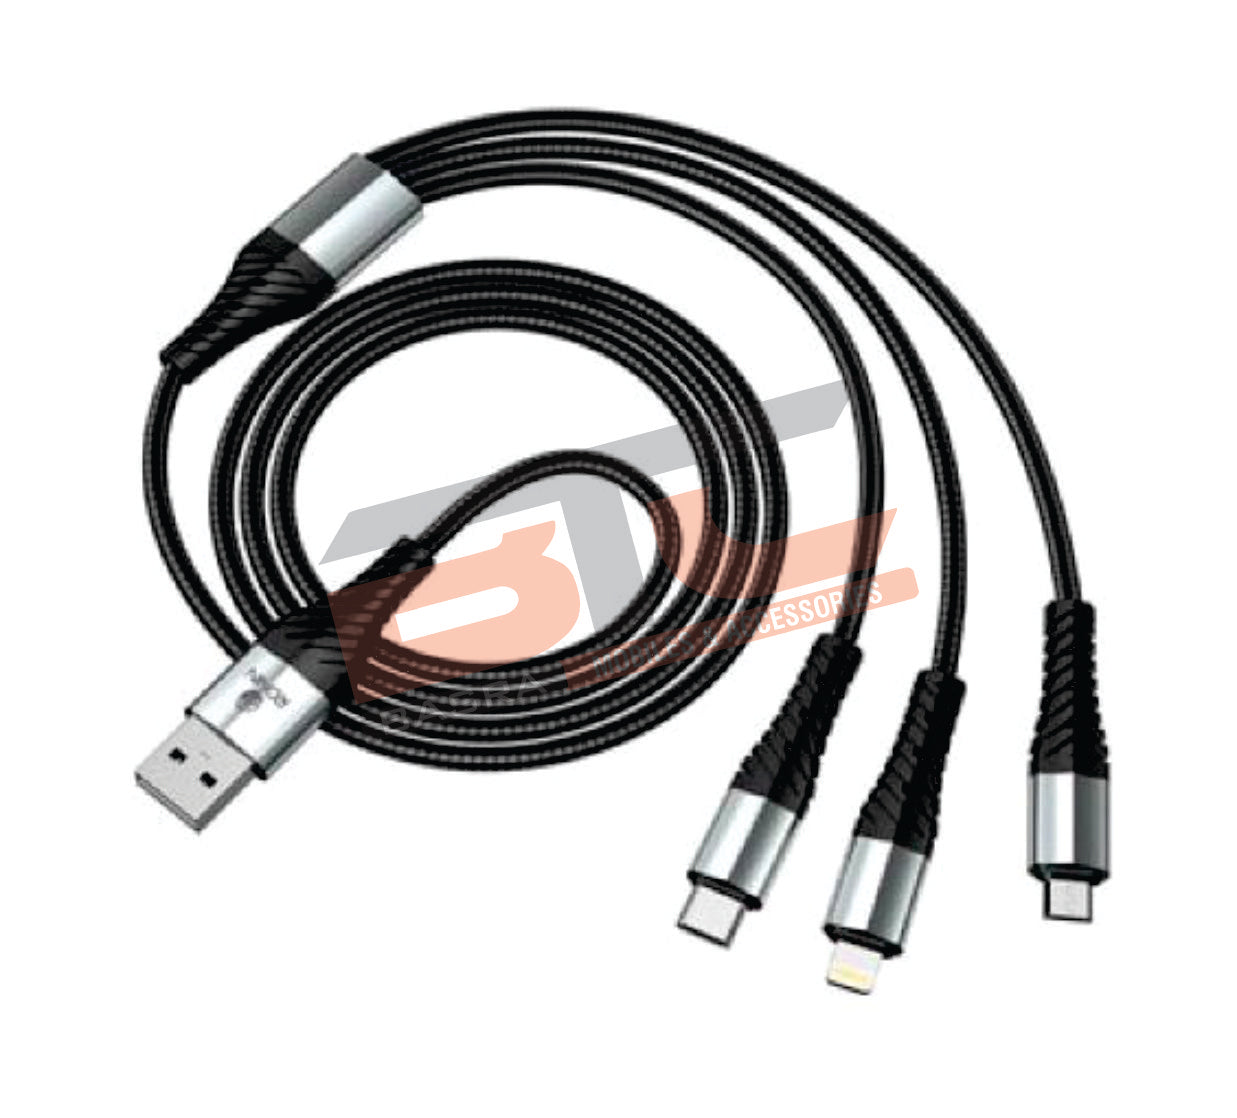 Ronin R-305 3 In 1 Cable - 1.2 MeterCable